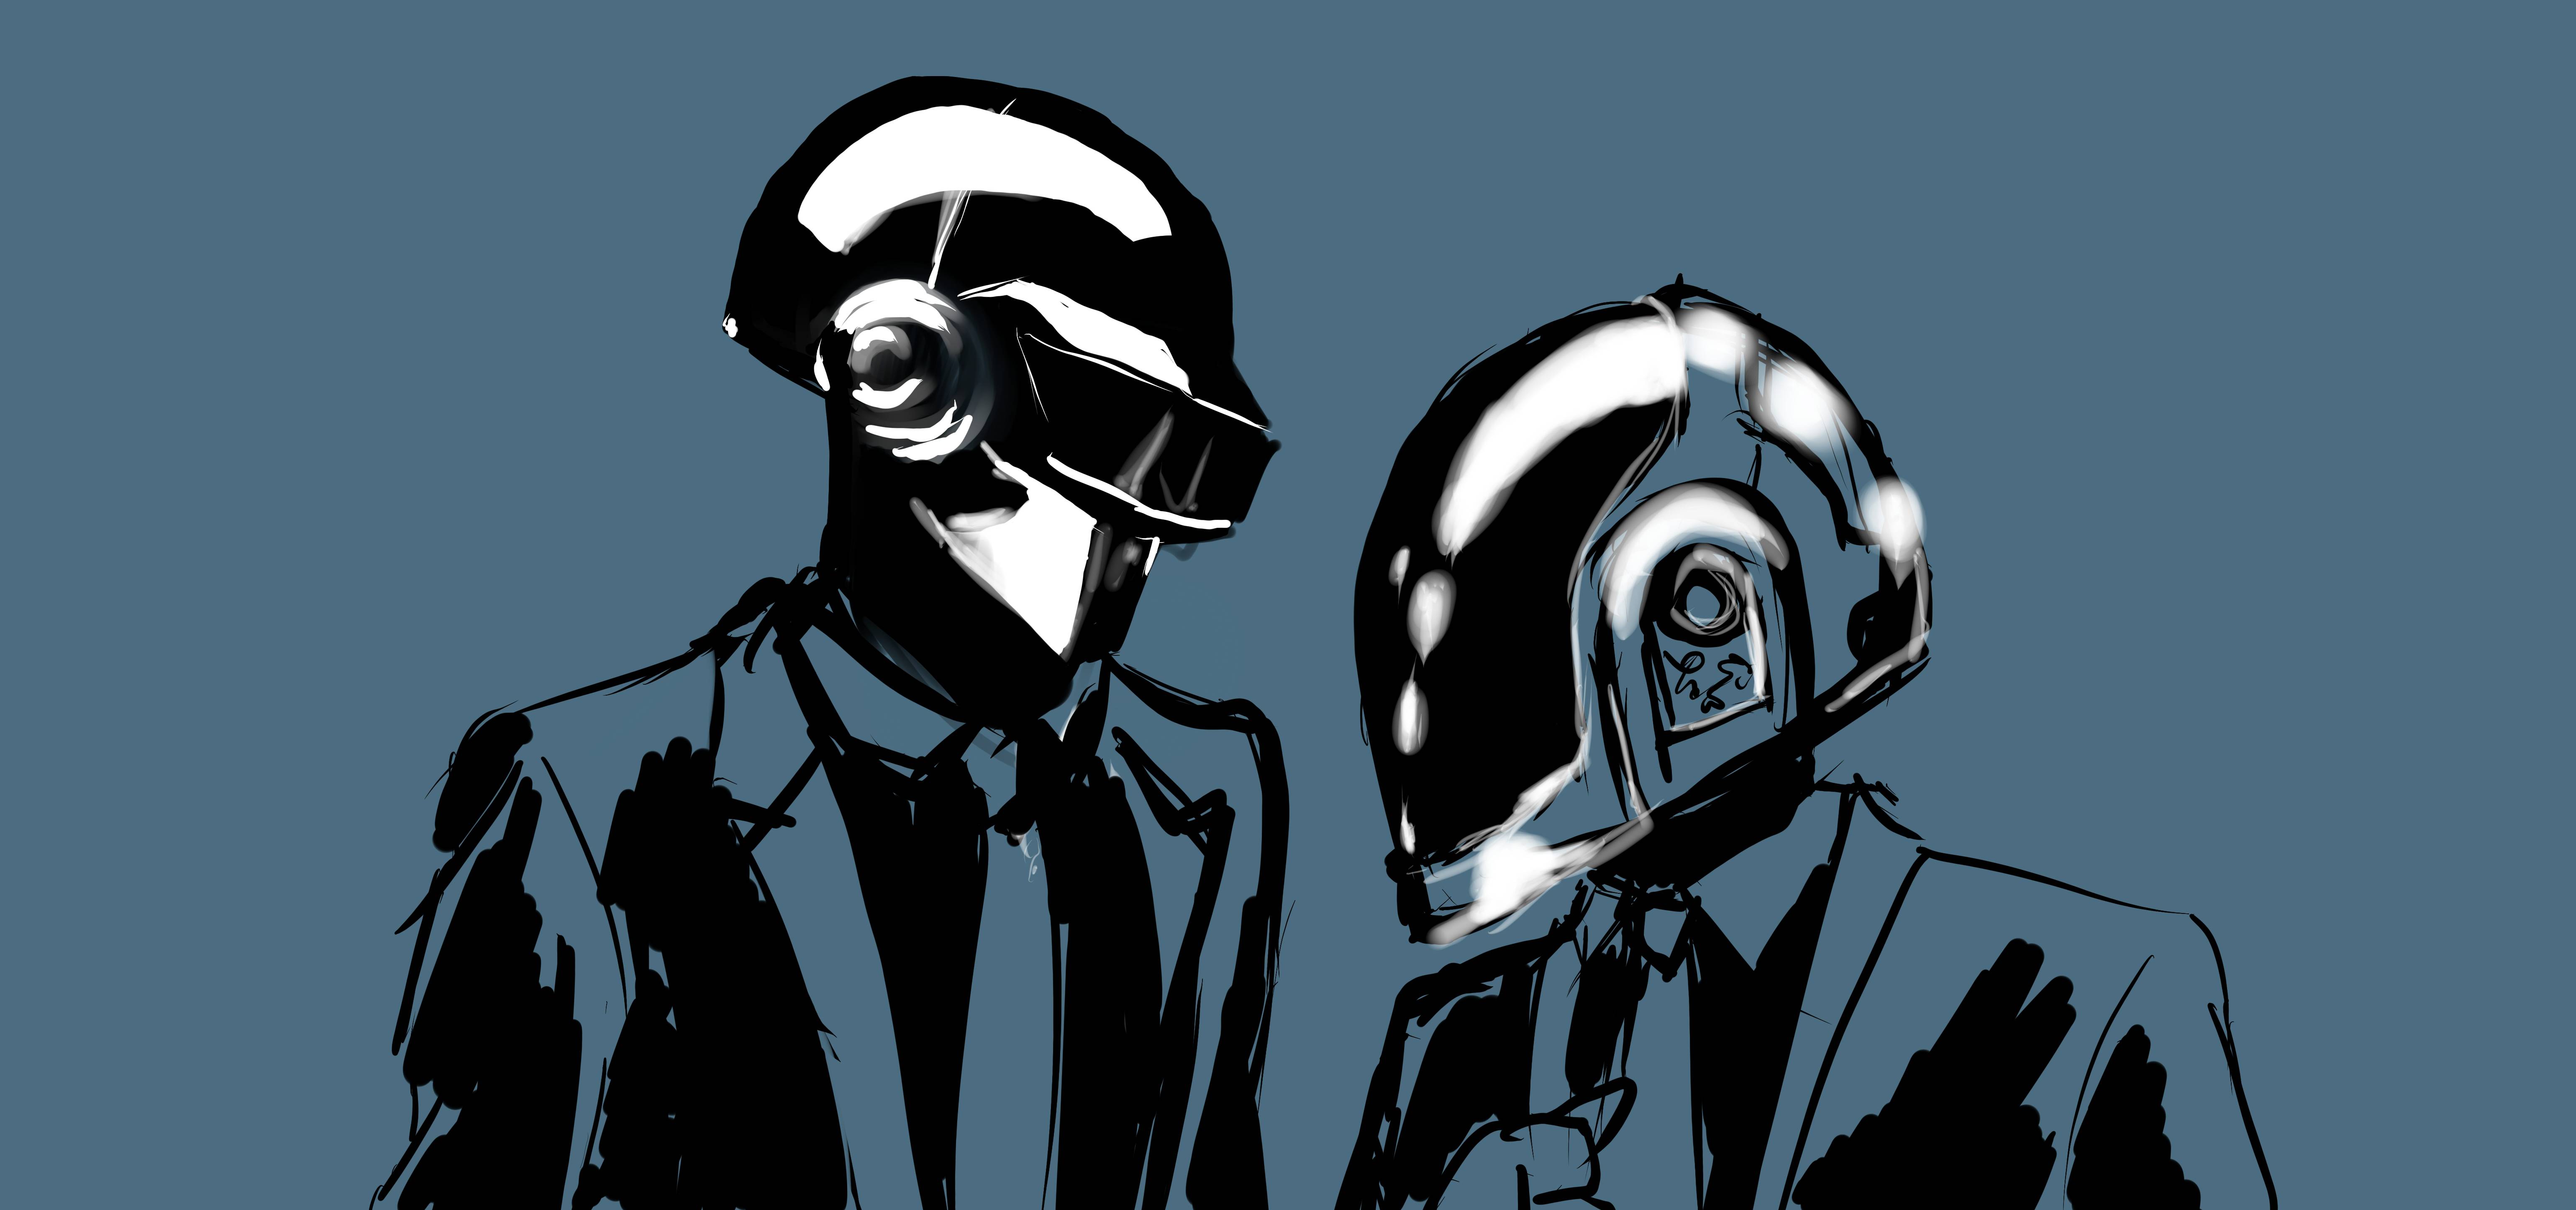 Daft Punk Sketch at Explore collection of Daft